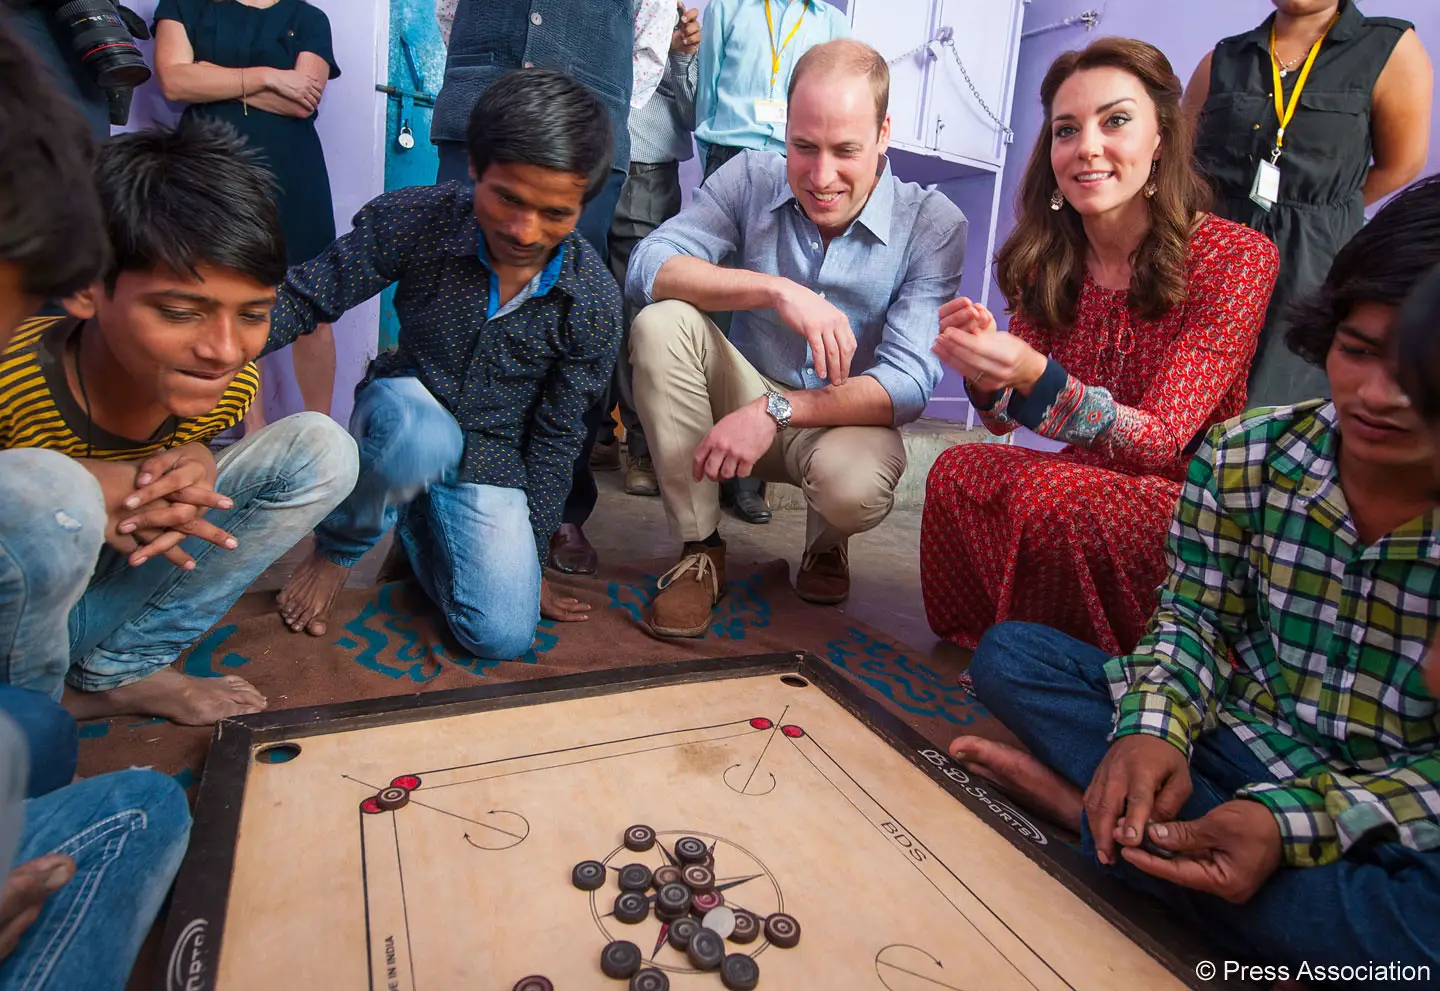 The Duke and Duchess of Cambridge played board game with children in Mumbai